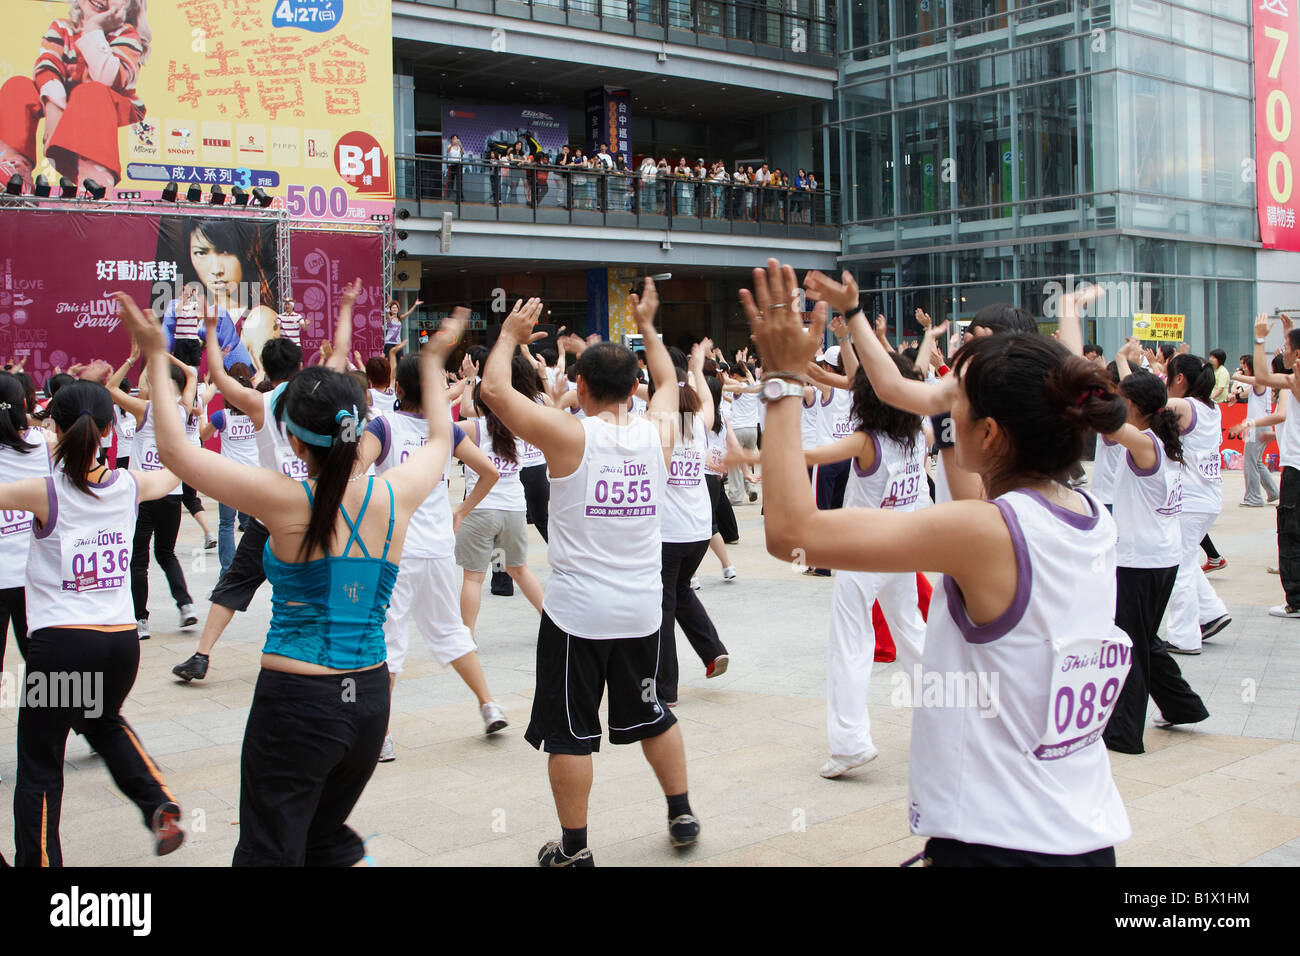 Crowd Of Taiwanese People Following Instructors Doing Aerobic Exercises Stock Photo